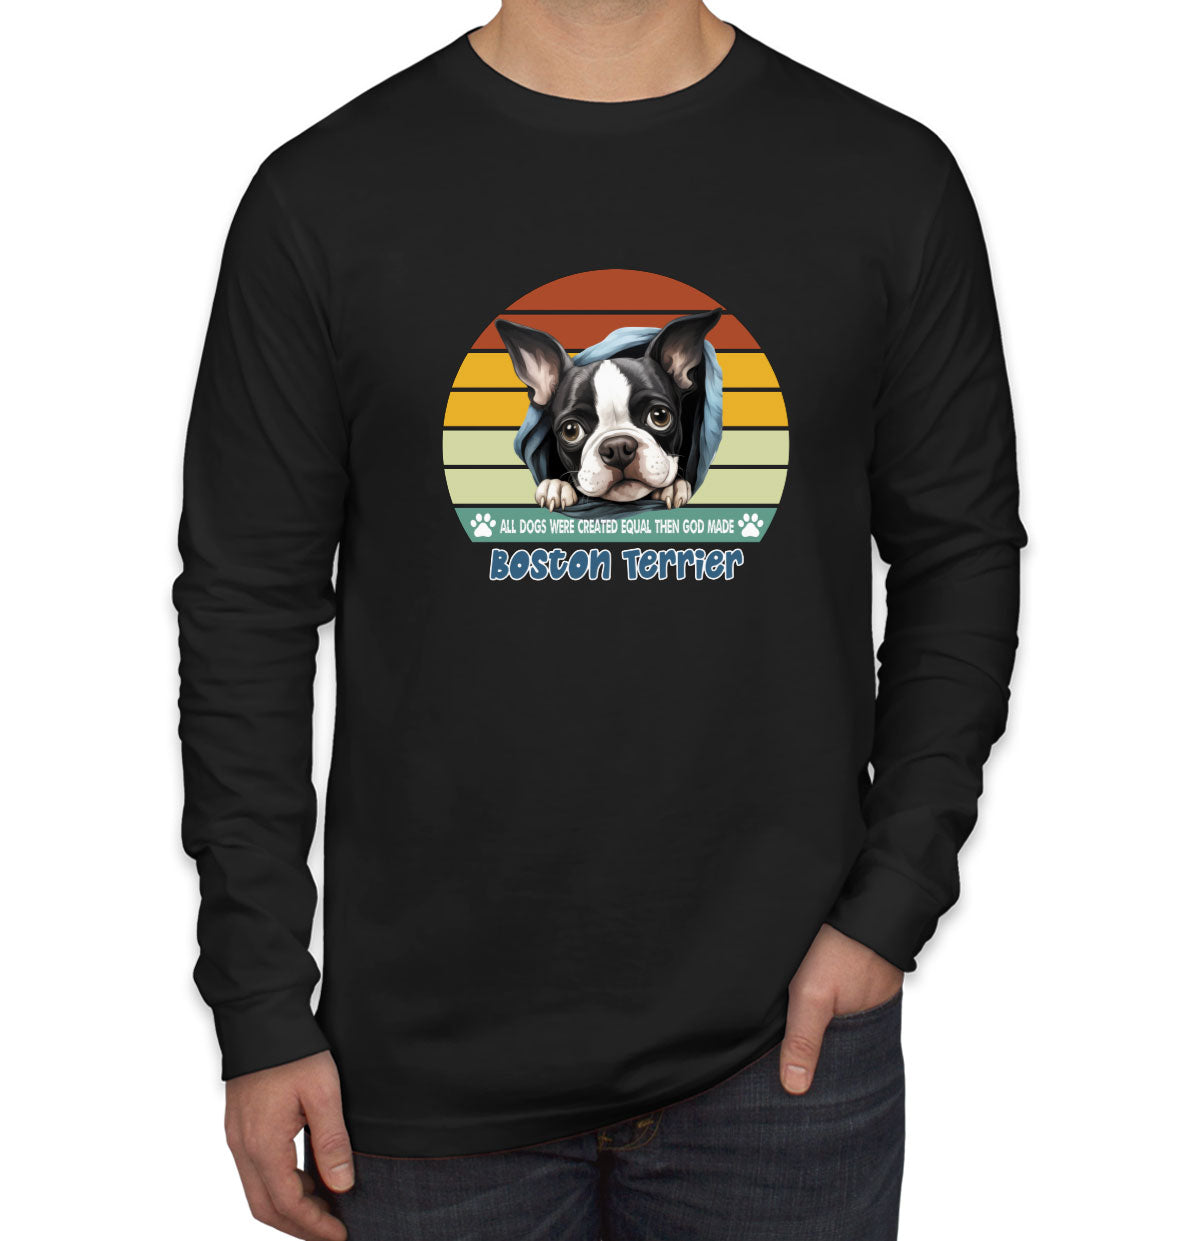 All Dogs Were Created Equal Boston Terrier Men's Long Sleeve Shirt